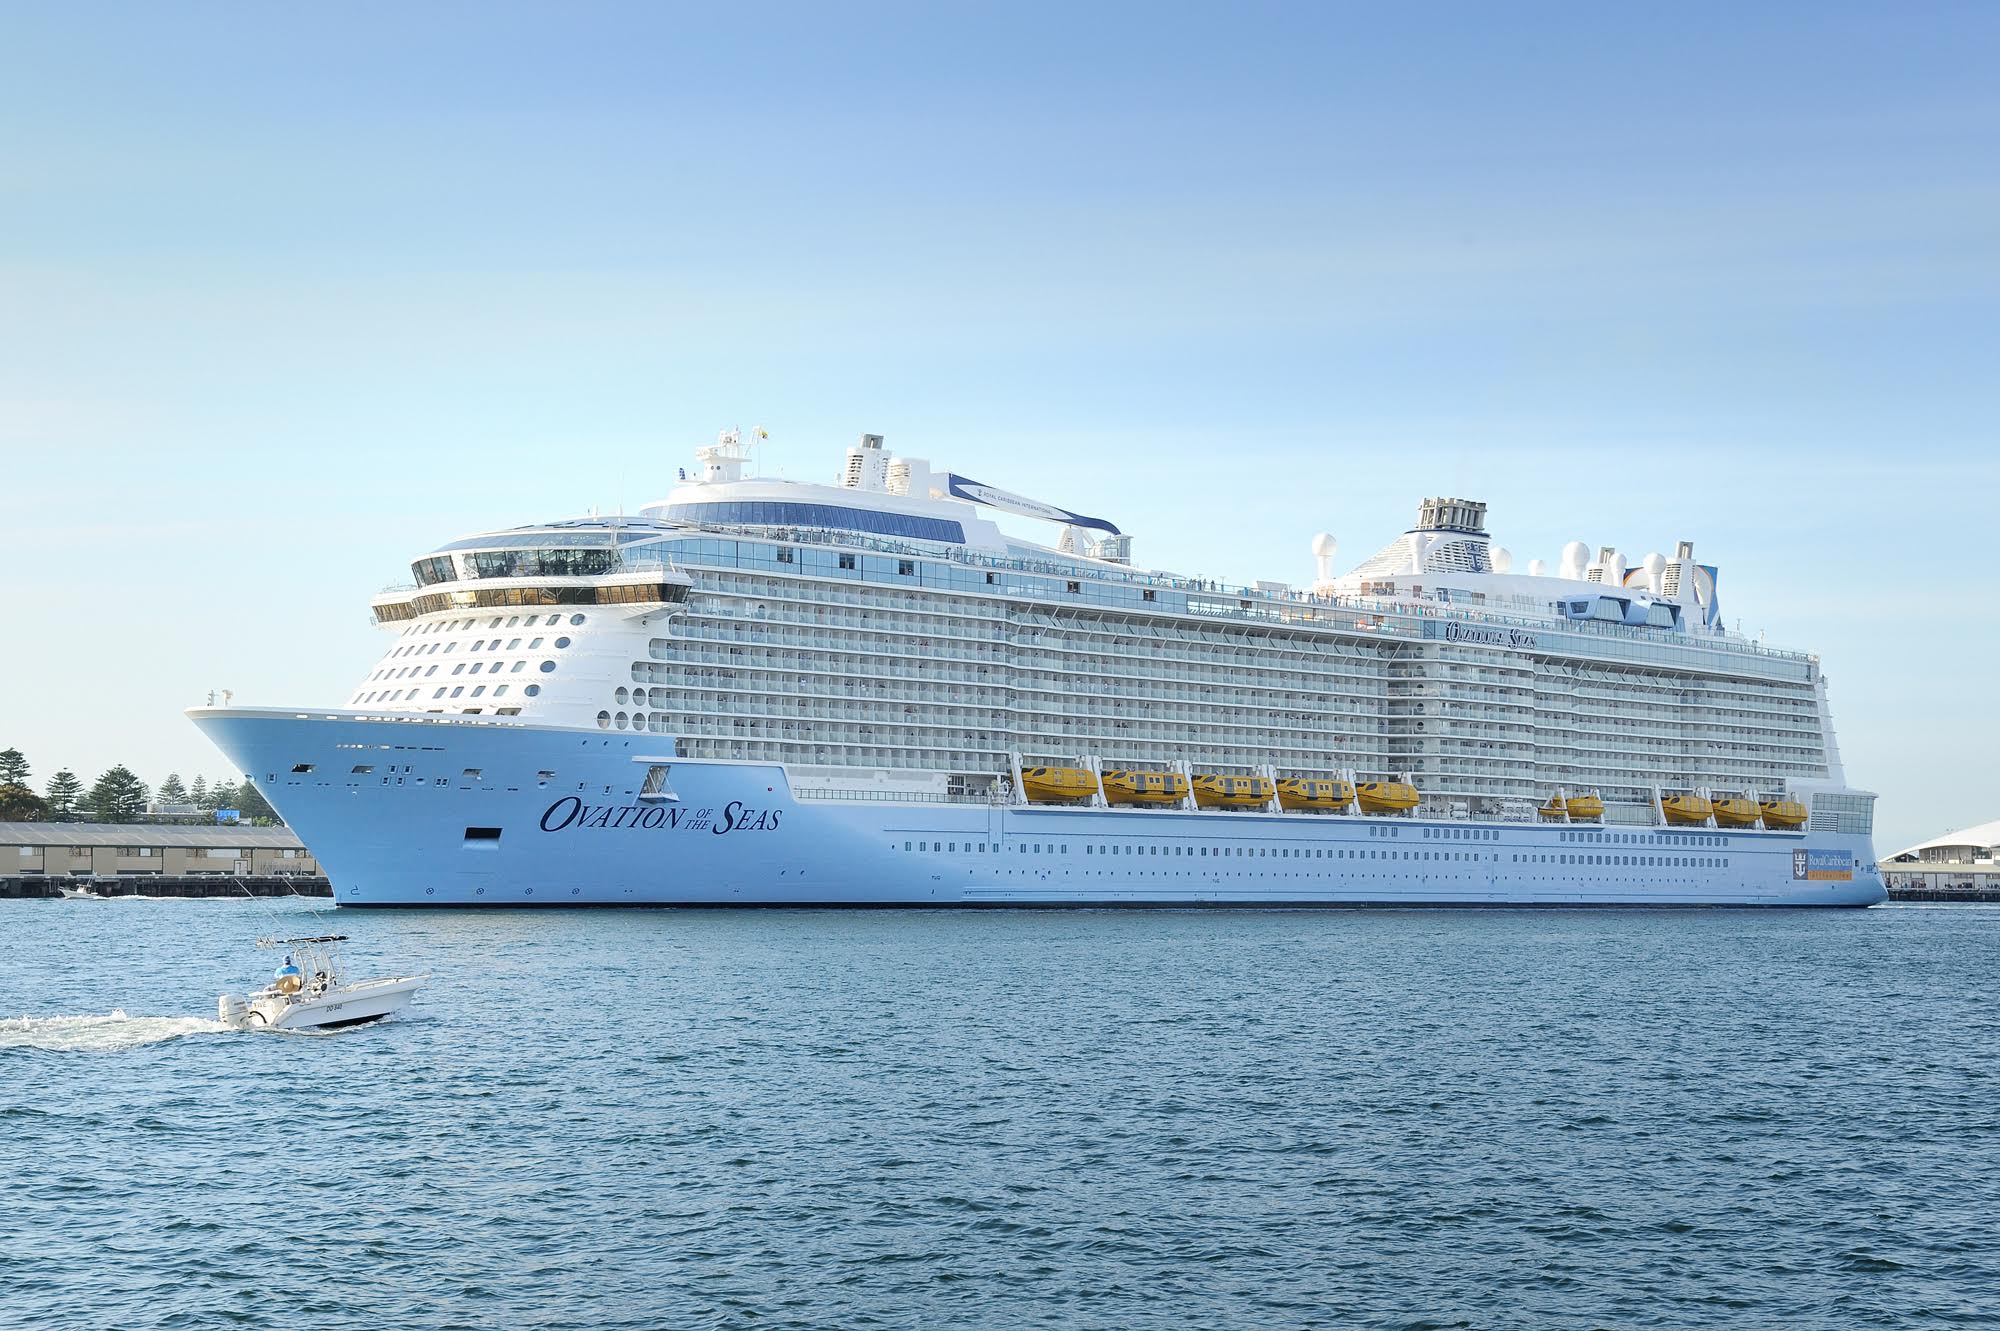 Ovation of the Seas crew praised after gastric outbreak - Cruise Passenger